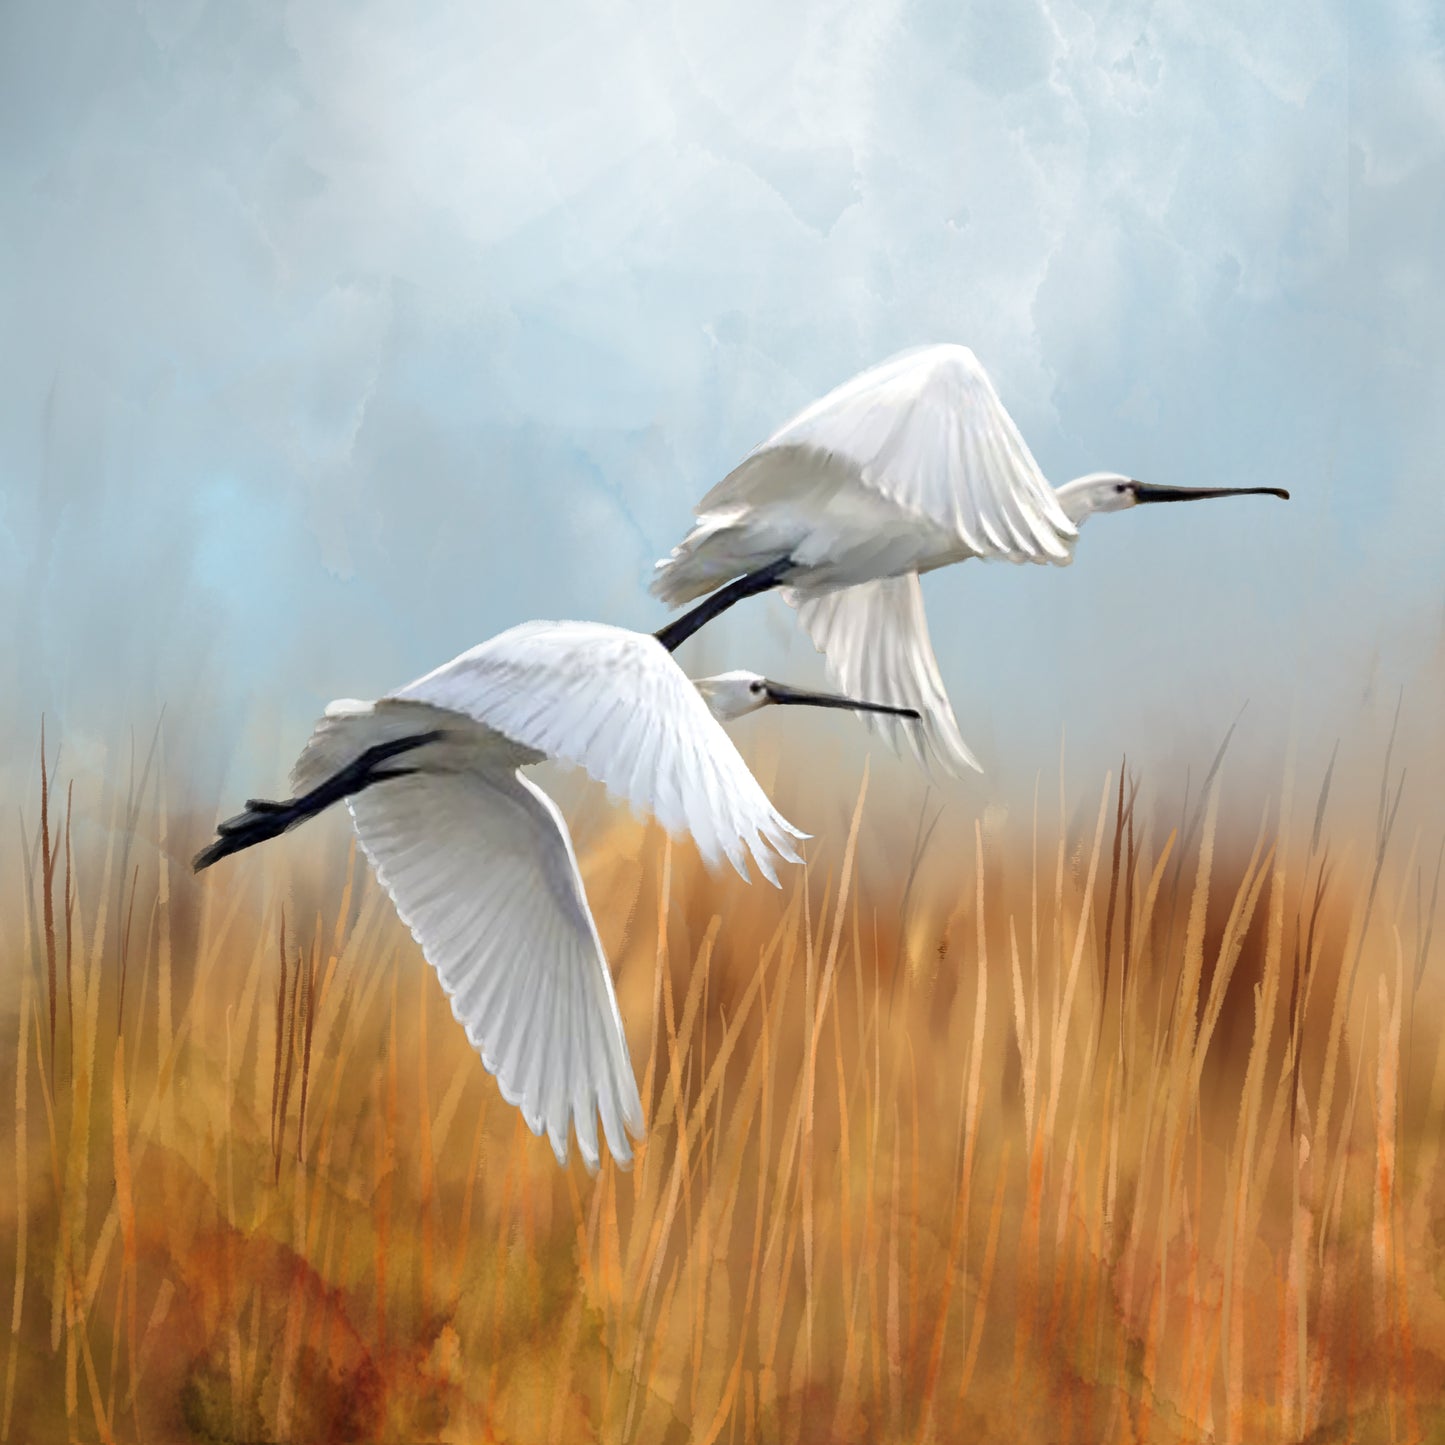 Spoonbills Ascending - Illustrated Print by Thomas Little